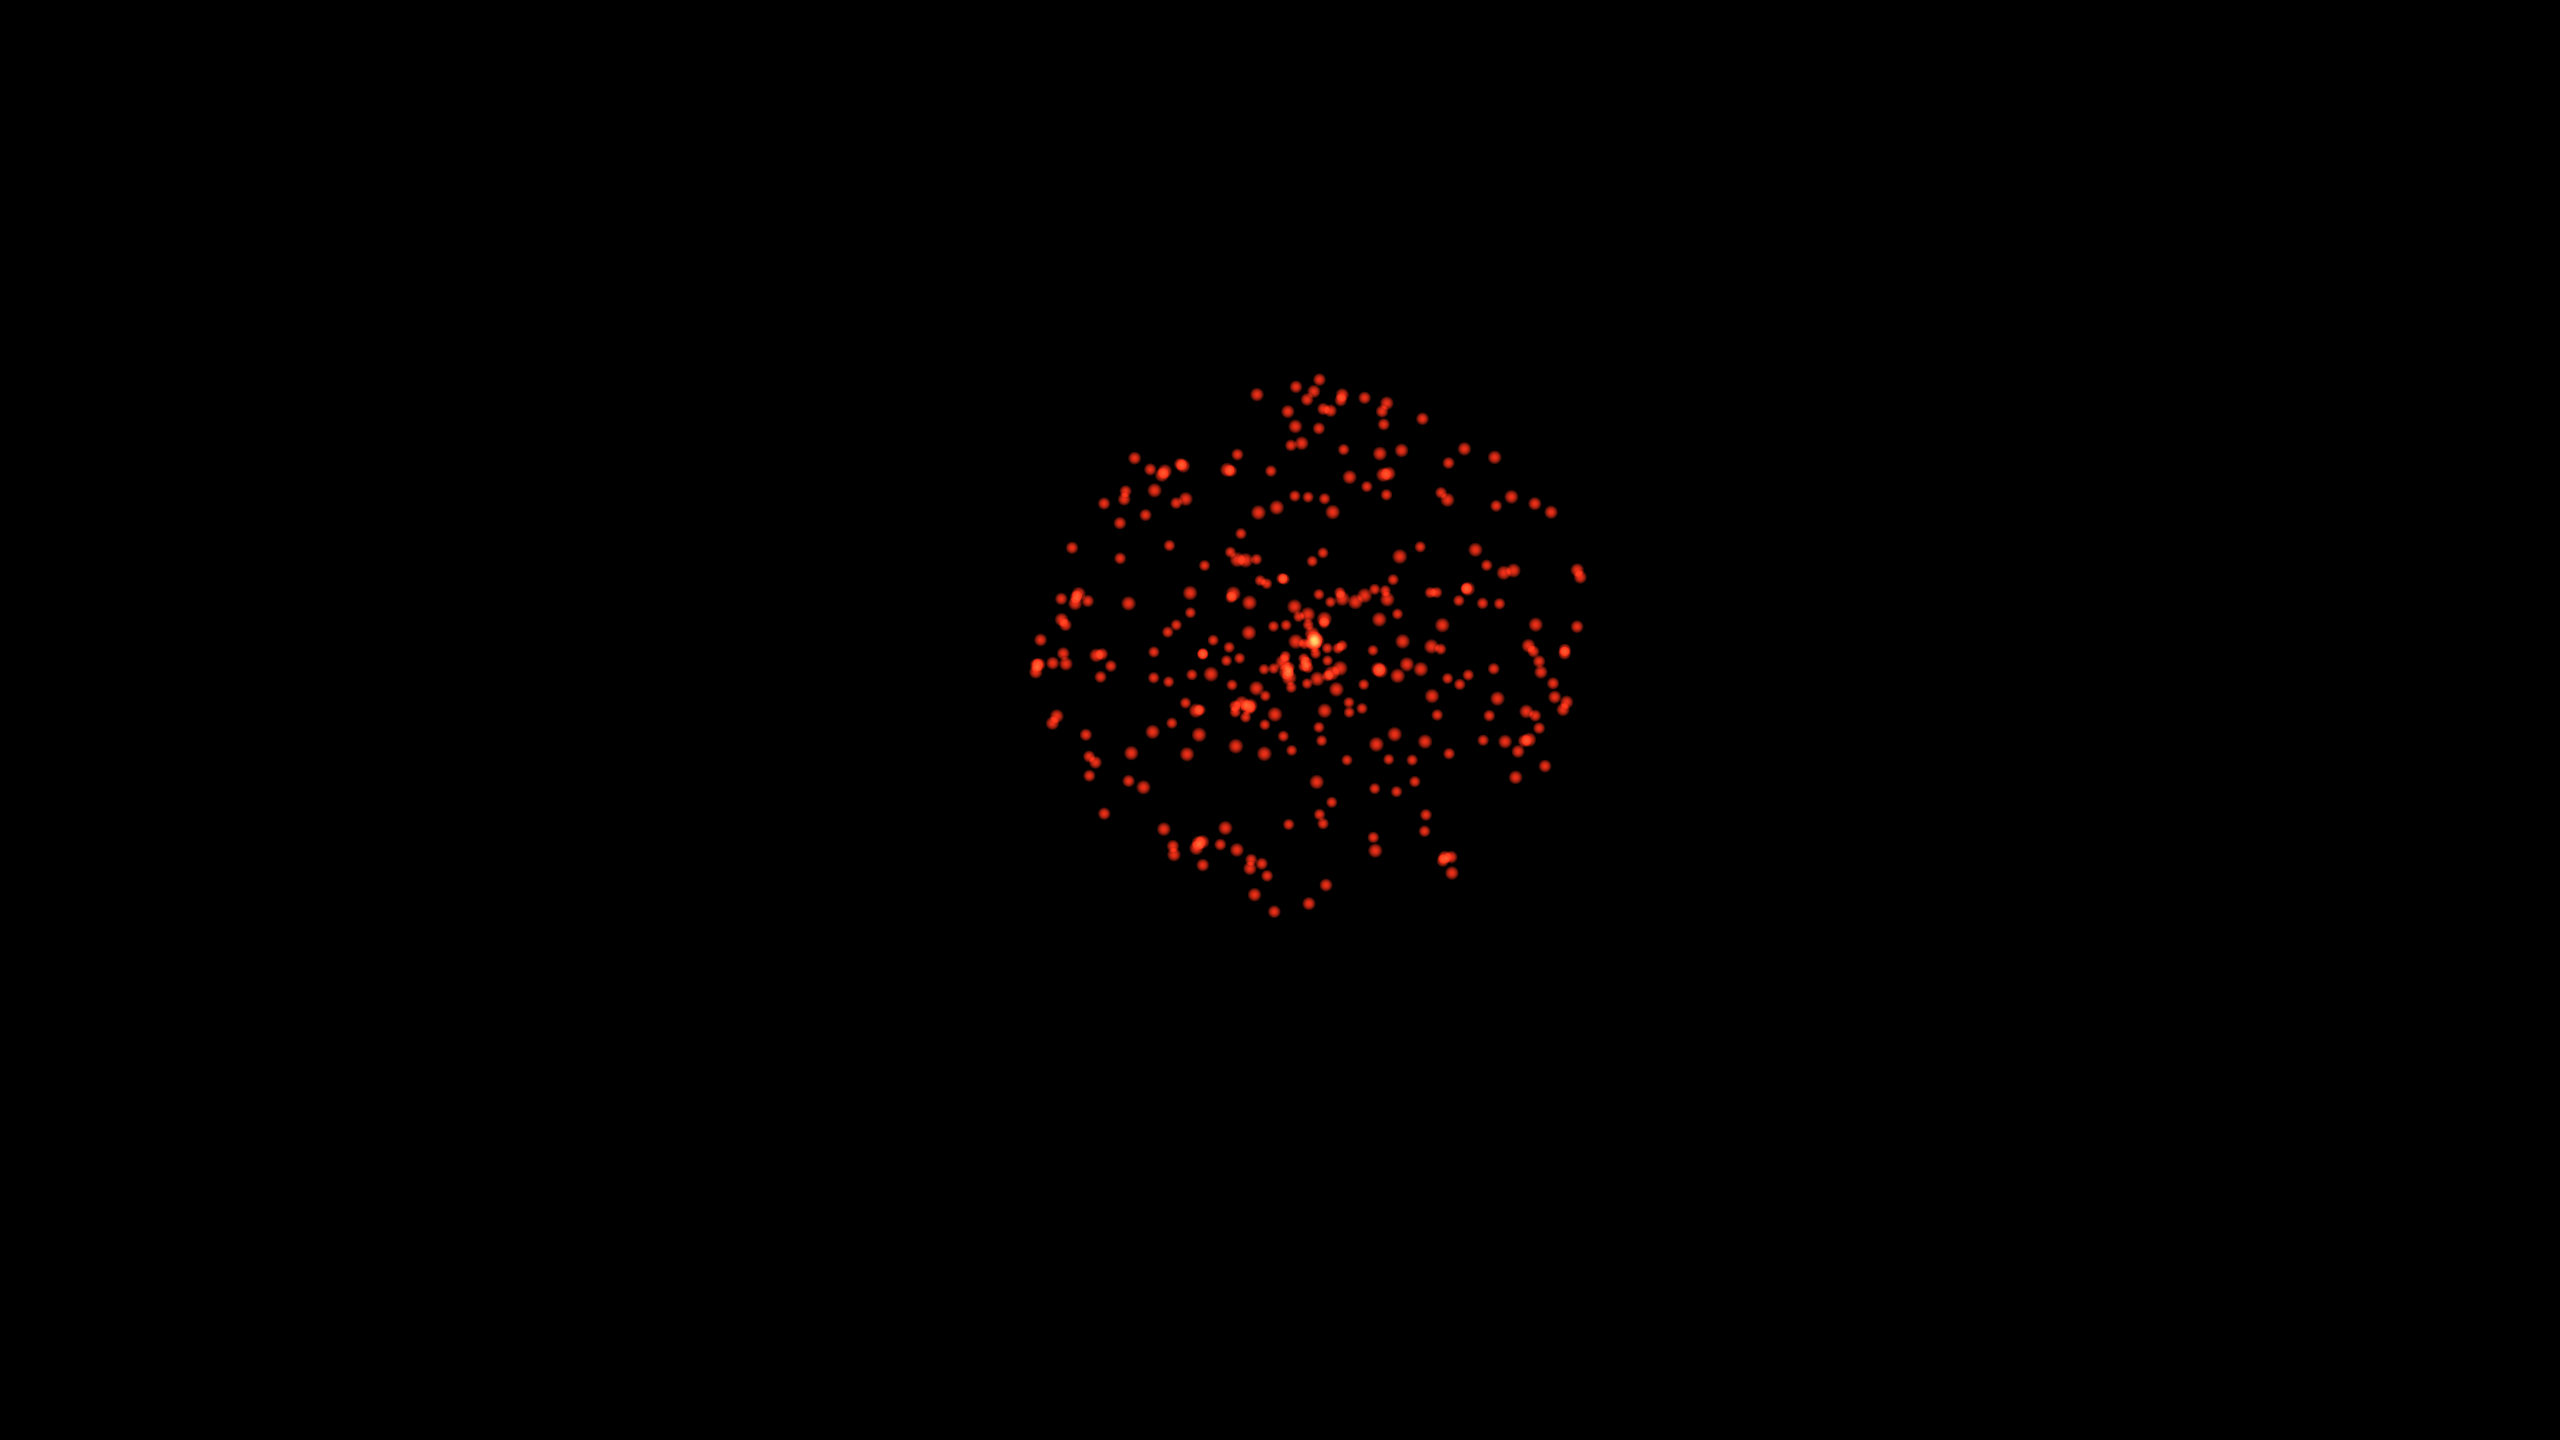 Fireworks example